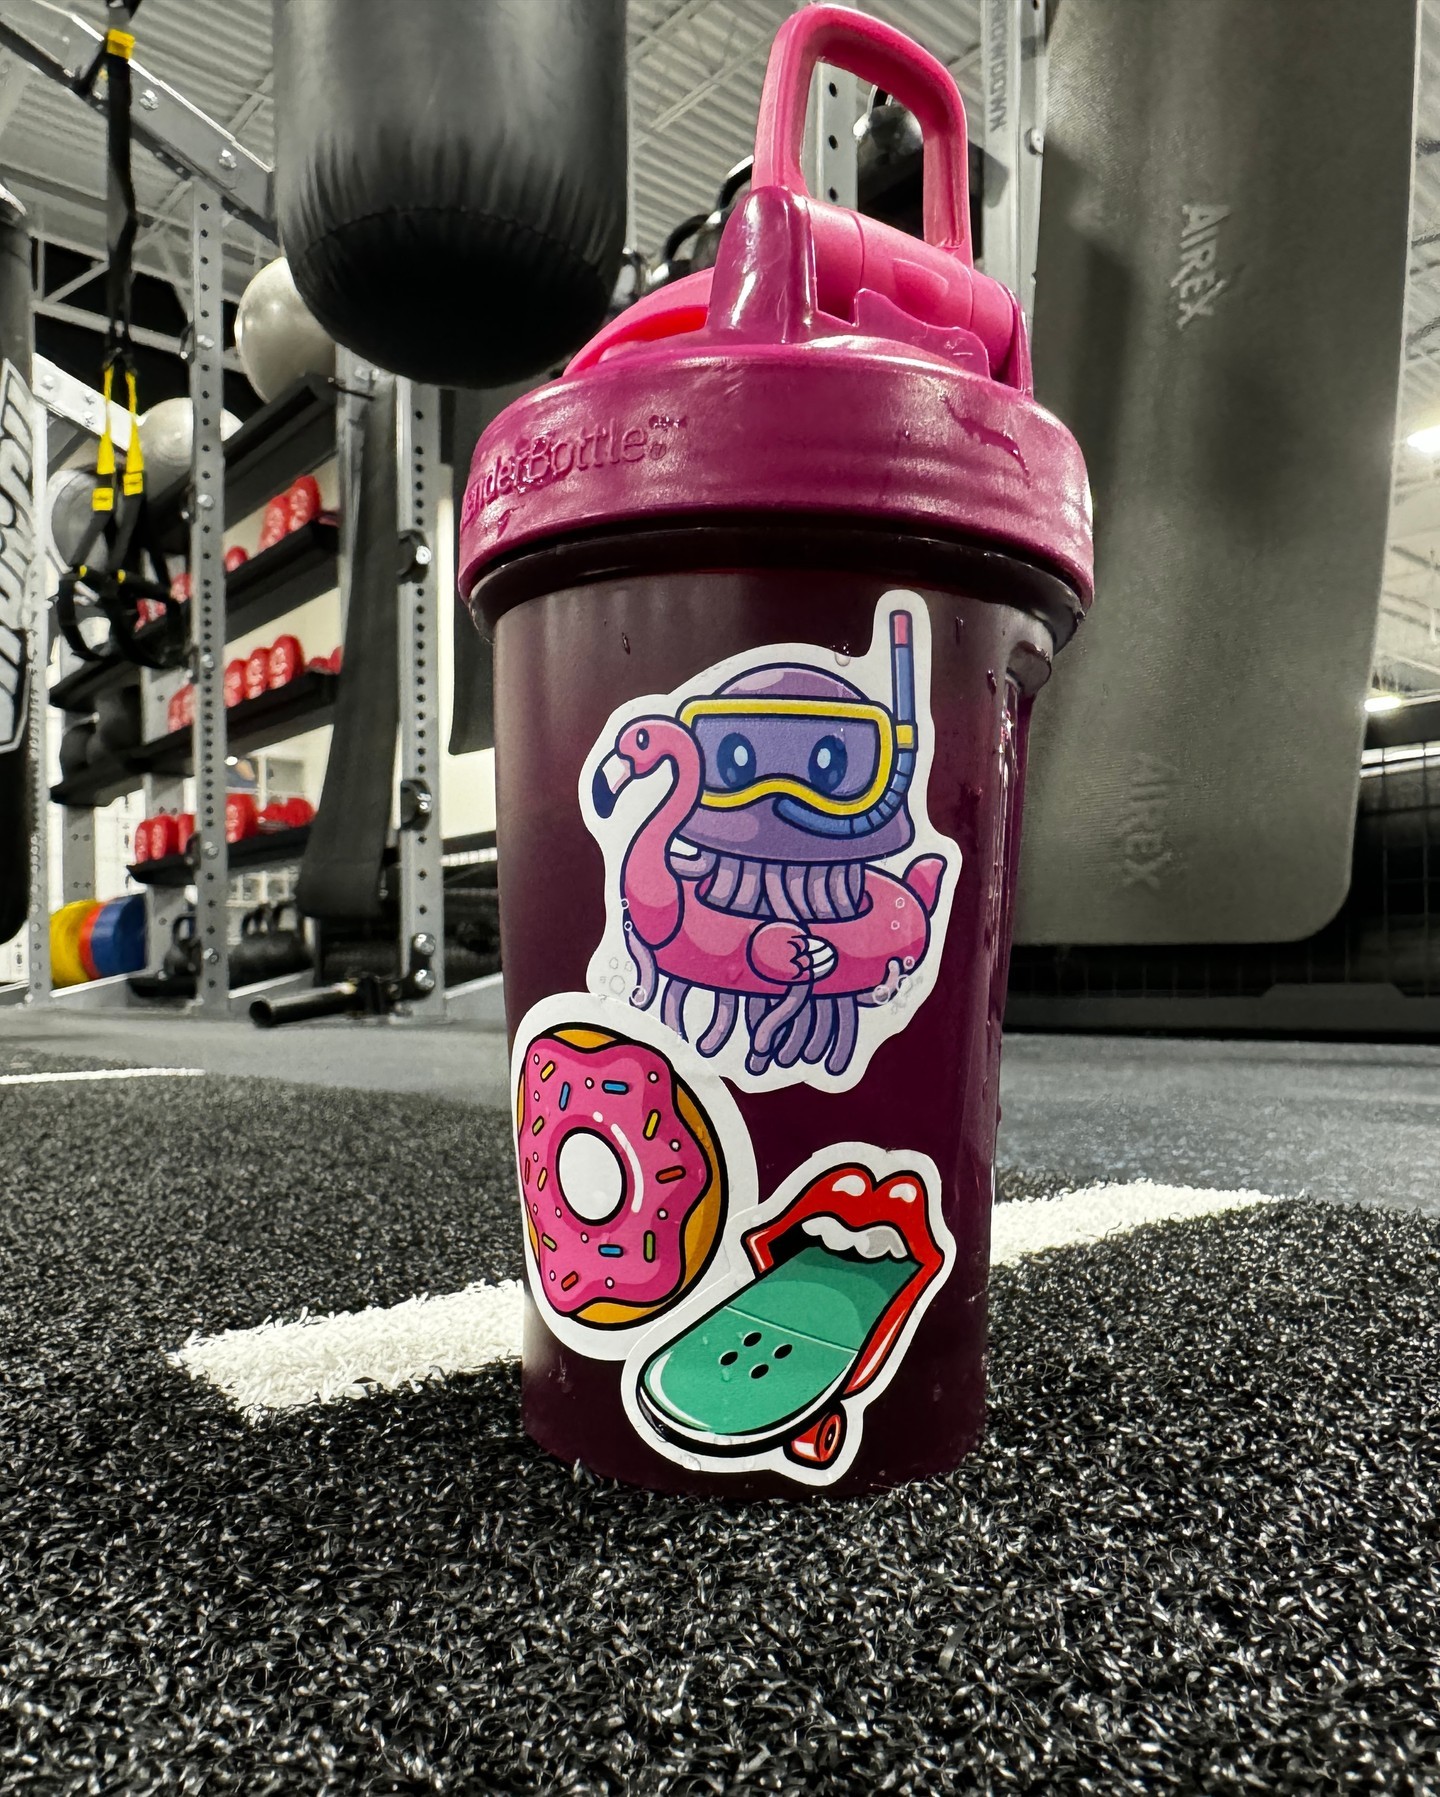 Stickers as strong as your gym pump 💪

#ElevateYourBrand
#StickersandMore